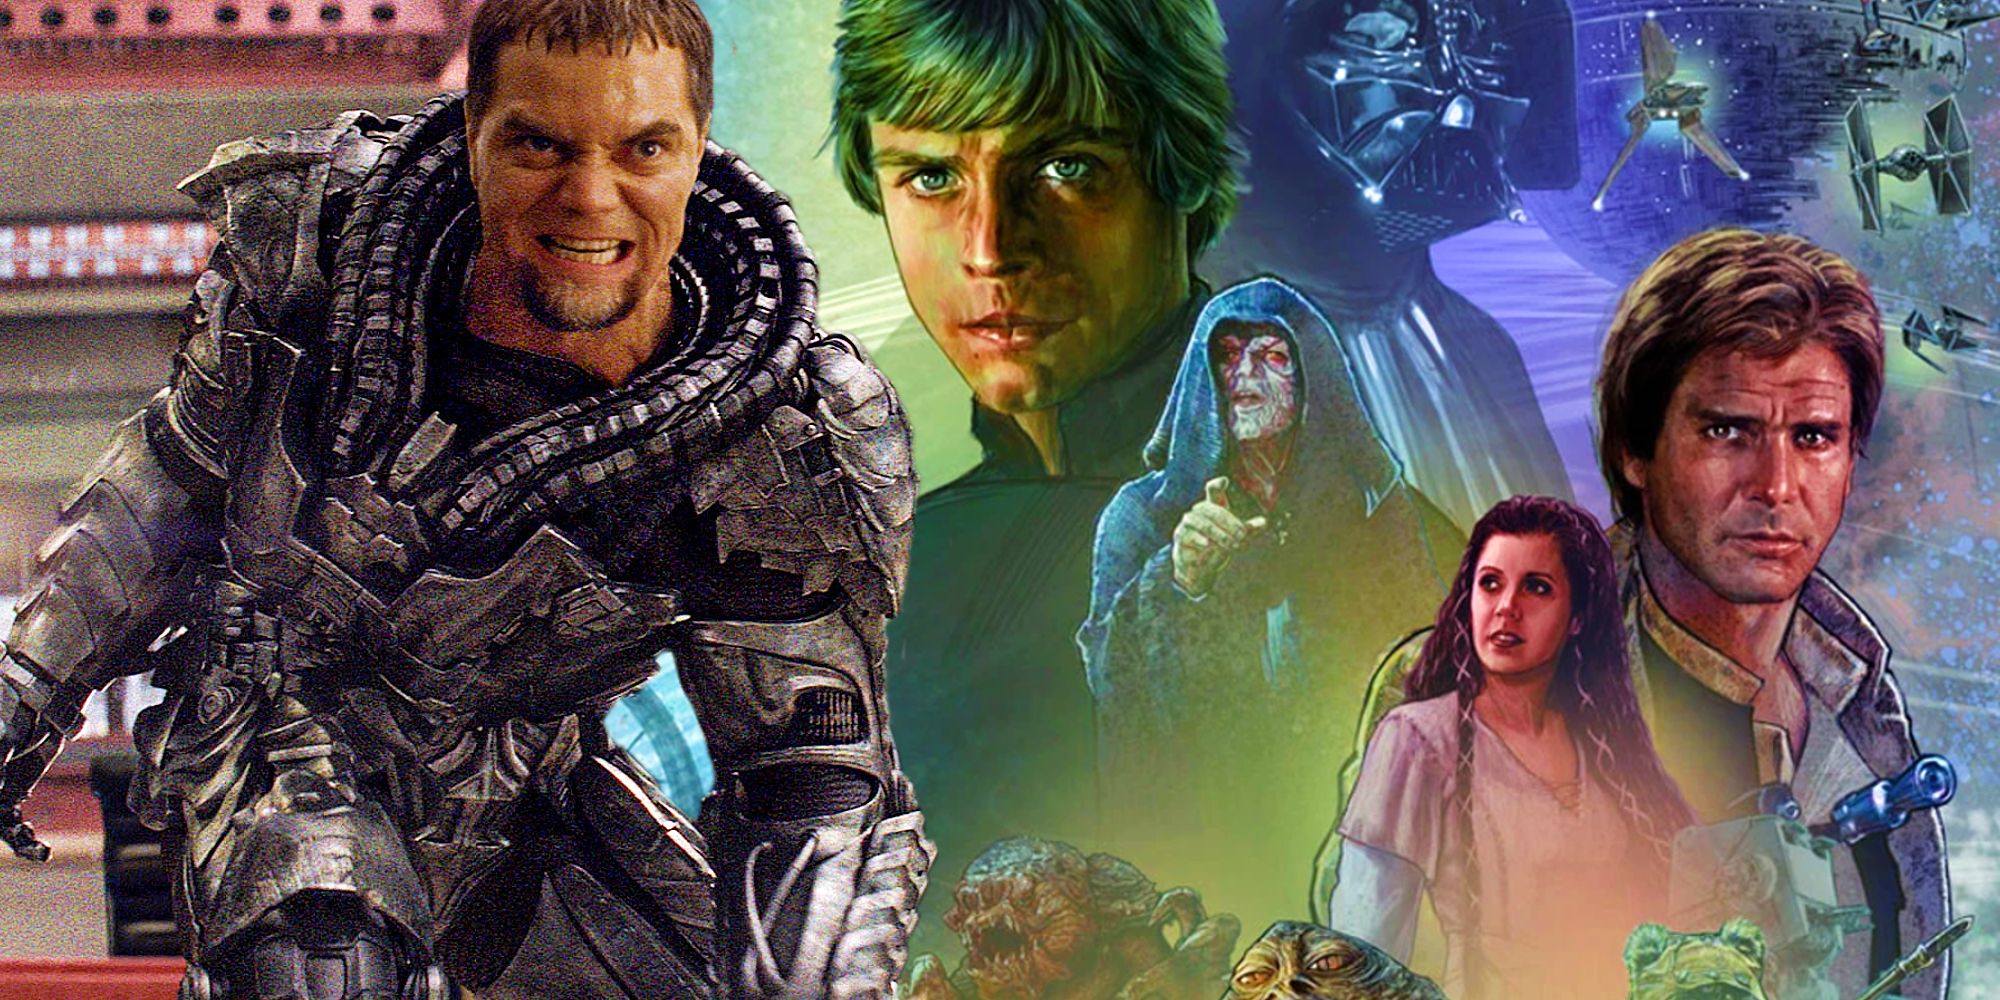 Michael Shannon On Zod's Humanity, Movies